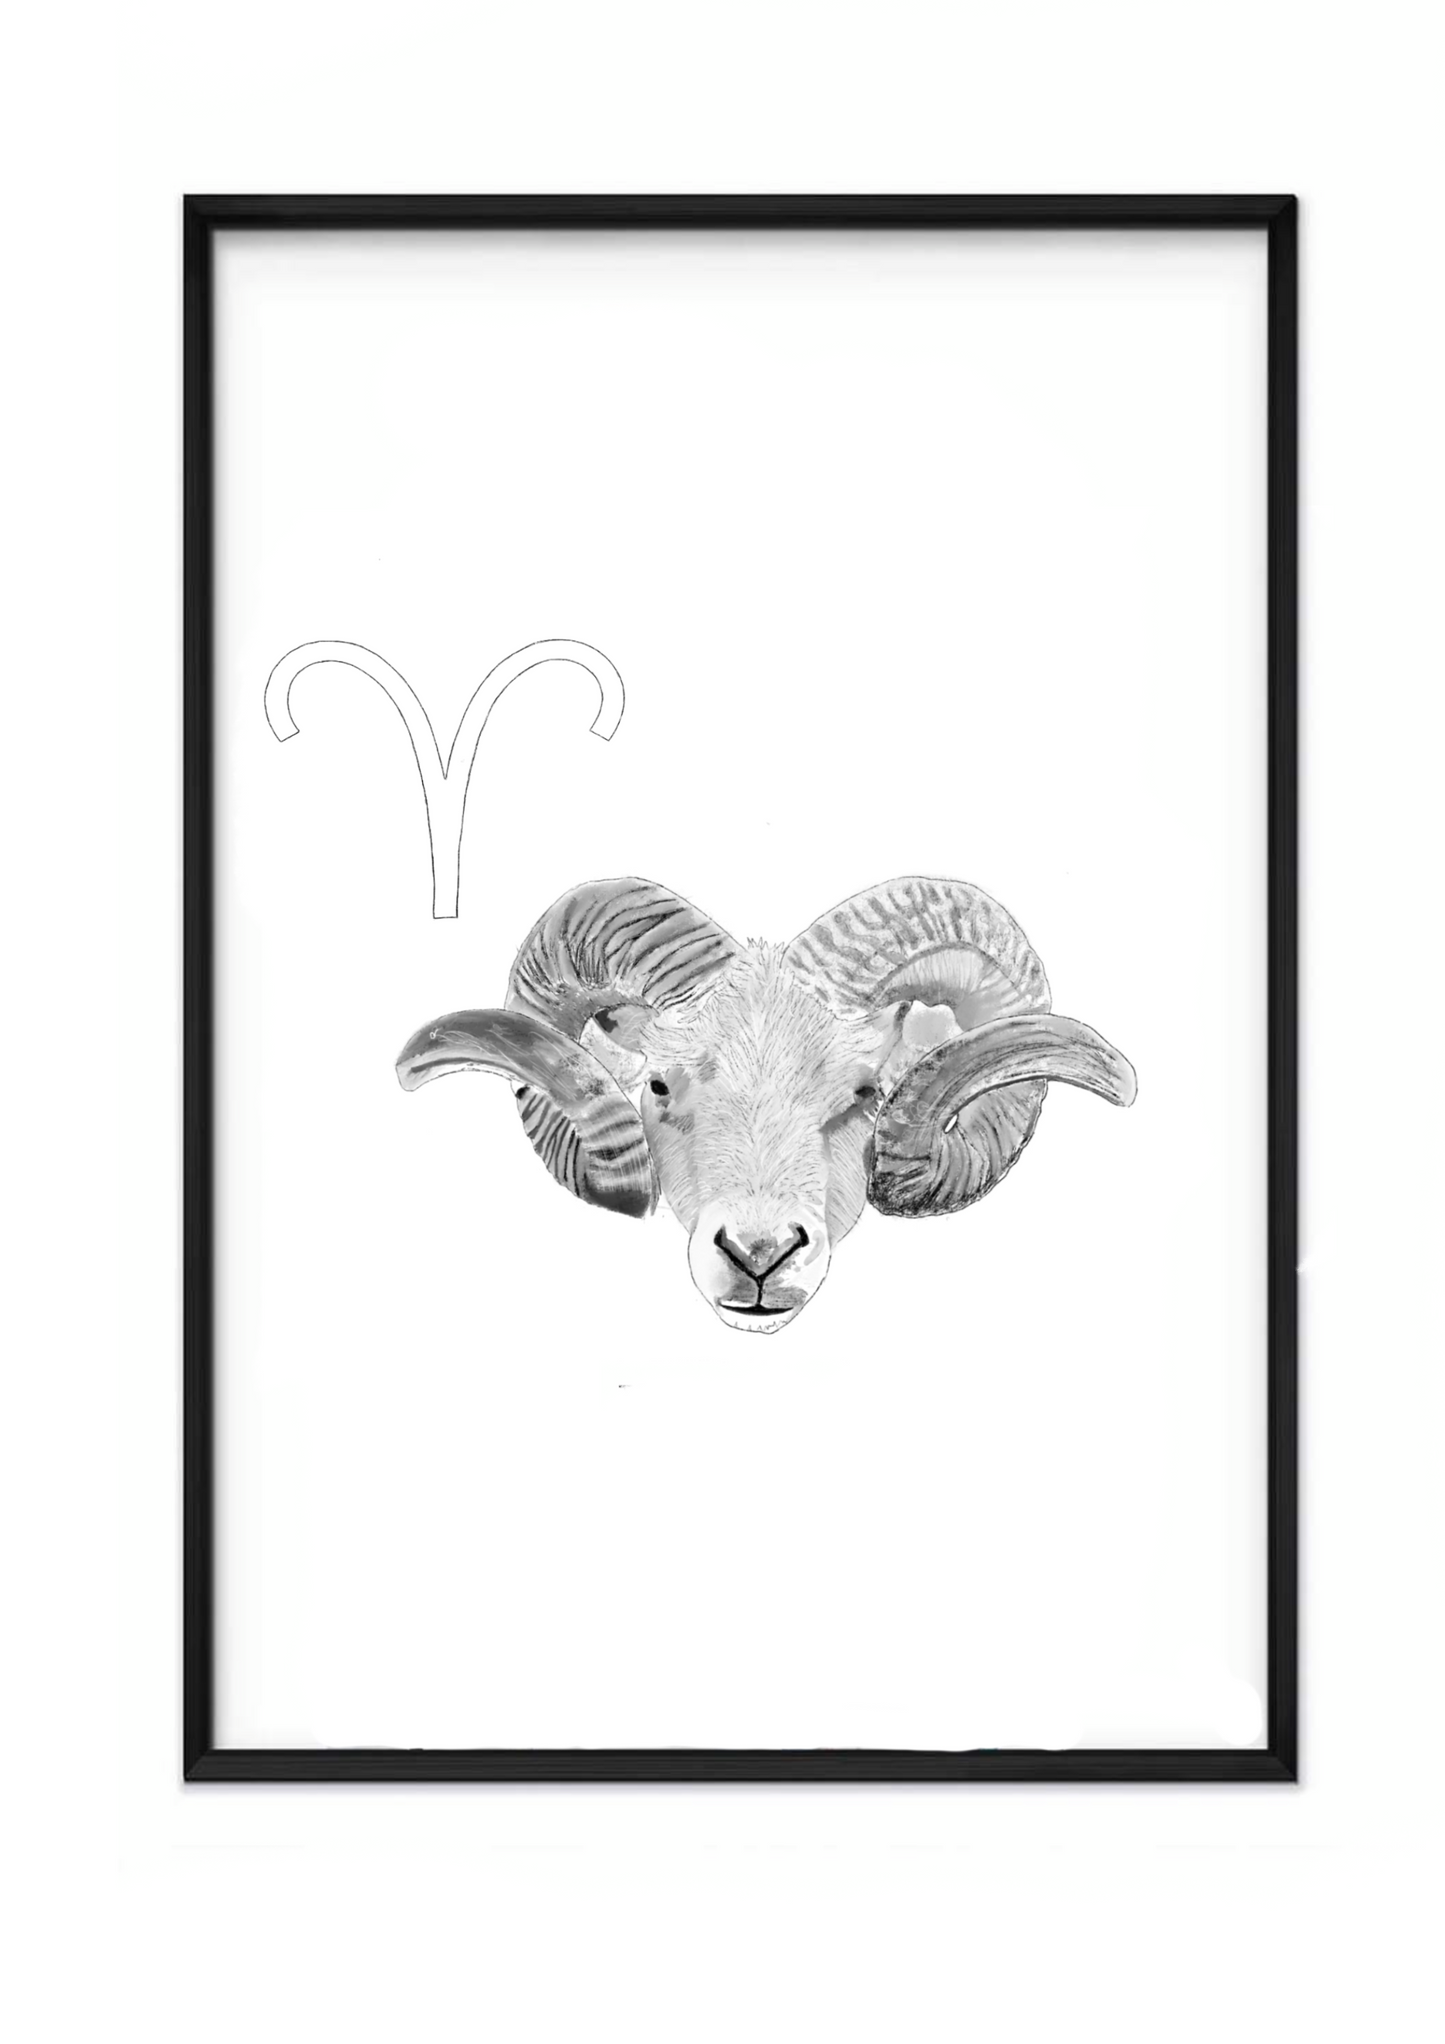 Download and print out the Aries Zodiac